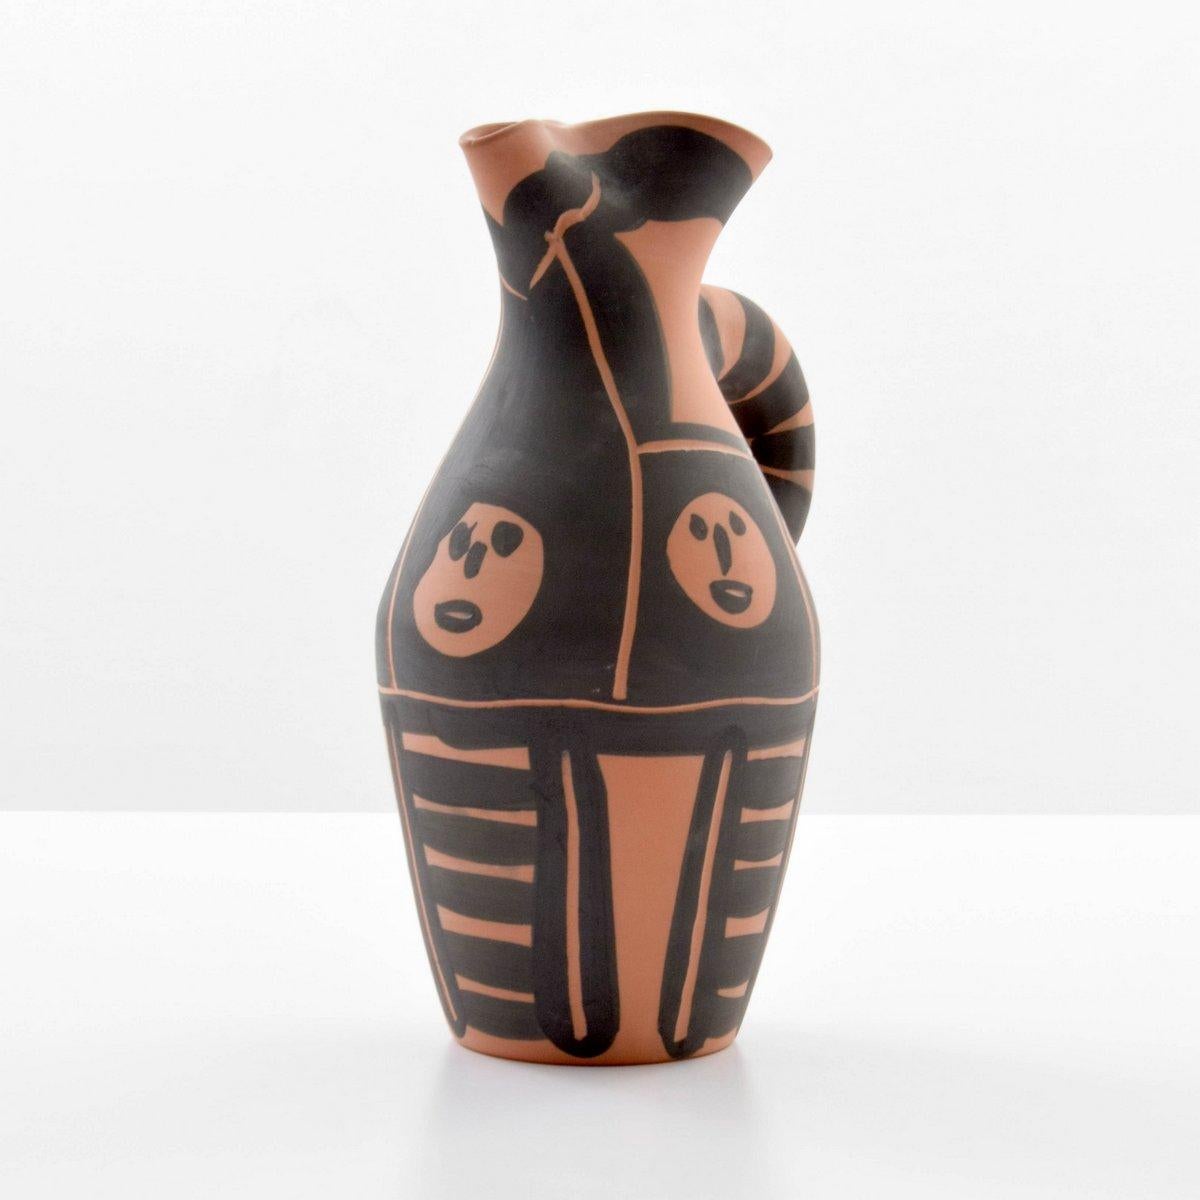 Little-Headed Yan pitcher by Pablo Picasso (Spanish, 1881-1973). Provenance: Private collection, Boca Raton, Florida. Reference: Pablo Picasso- Catalogue of the edited ceramic works 1947-1971, Alain Ramie, 515.

Markings: Madoura Plein Feu